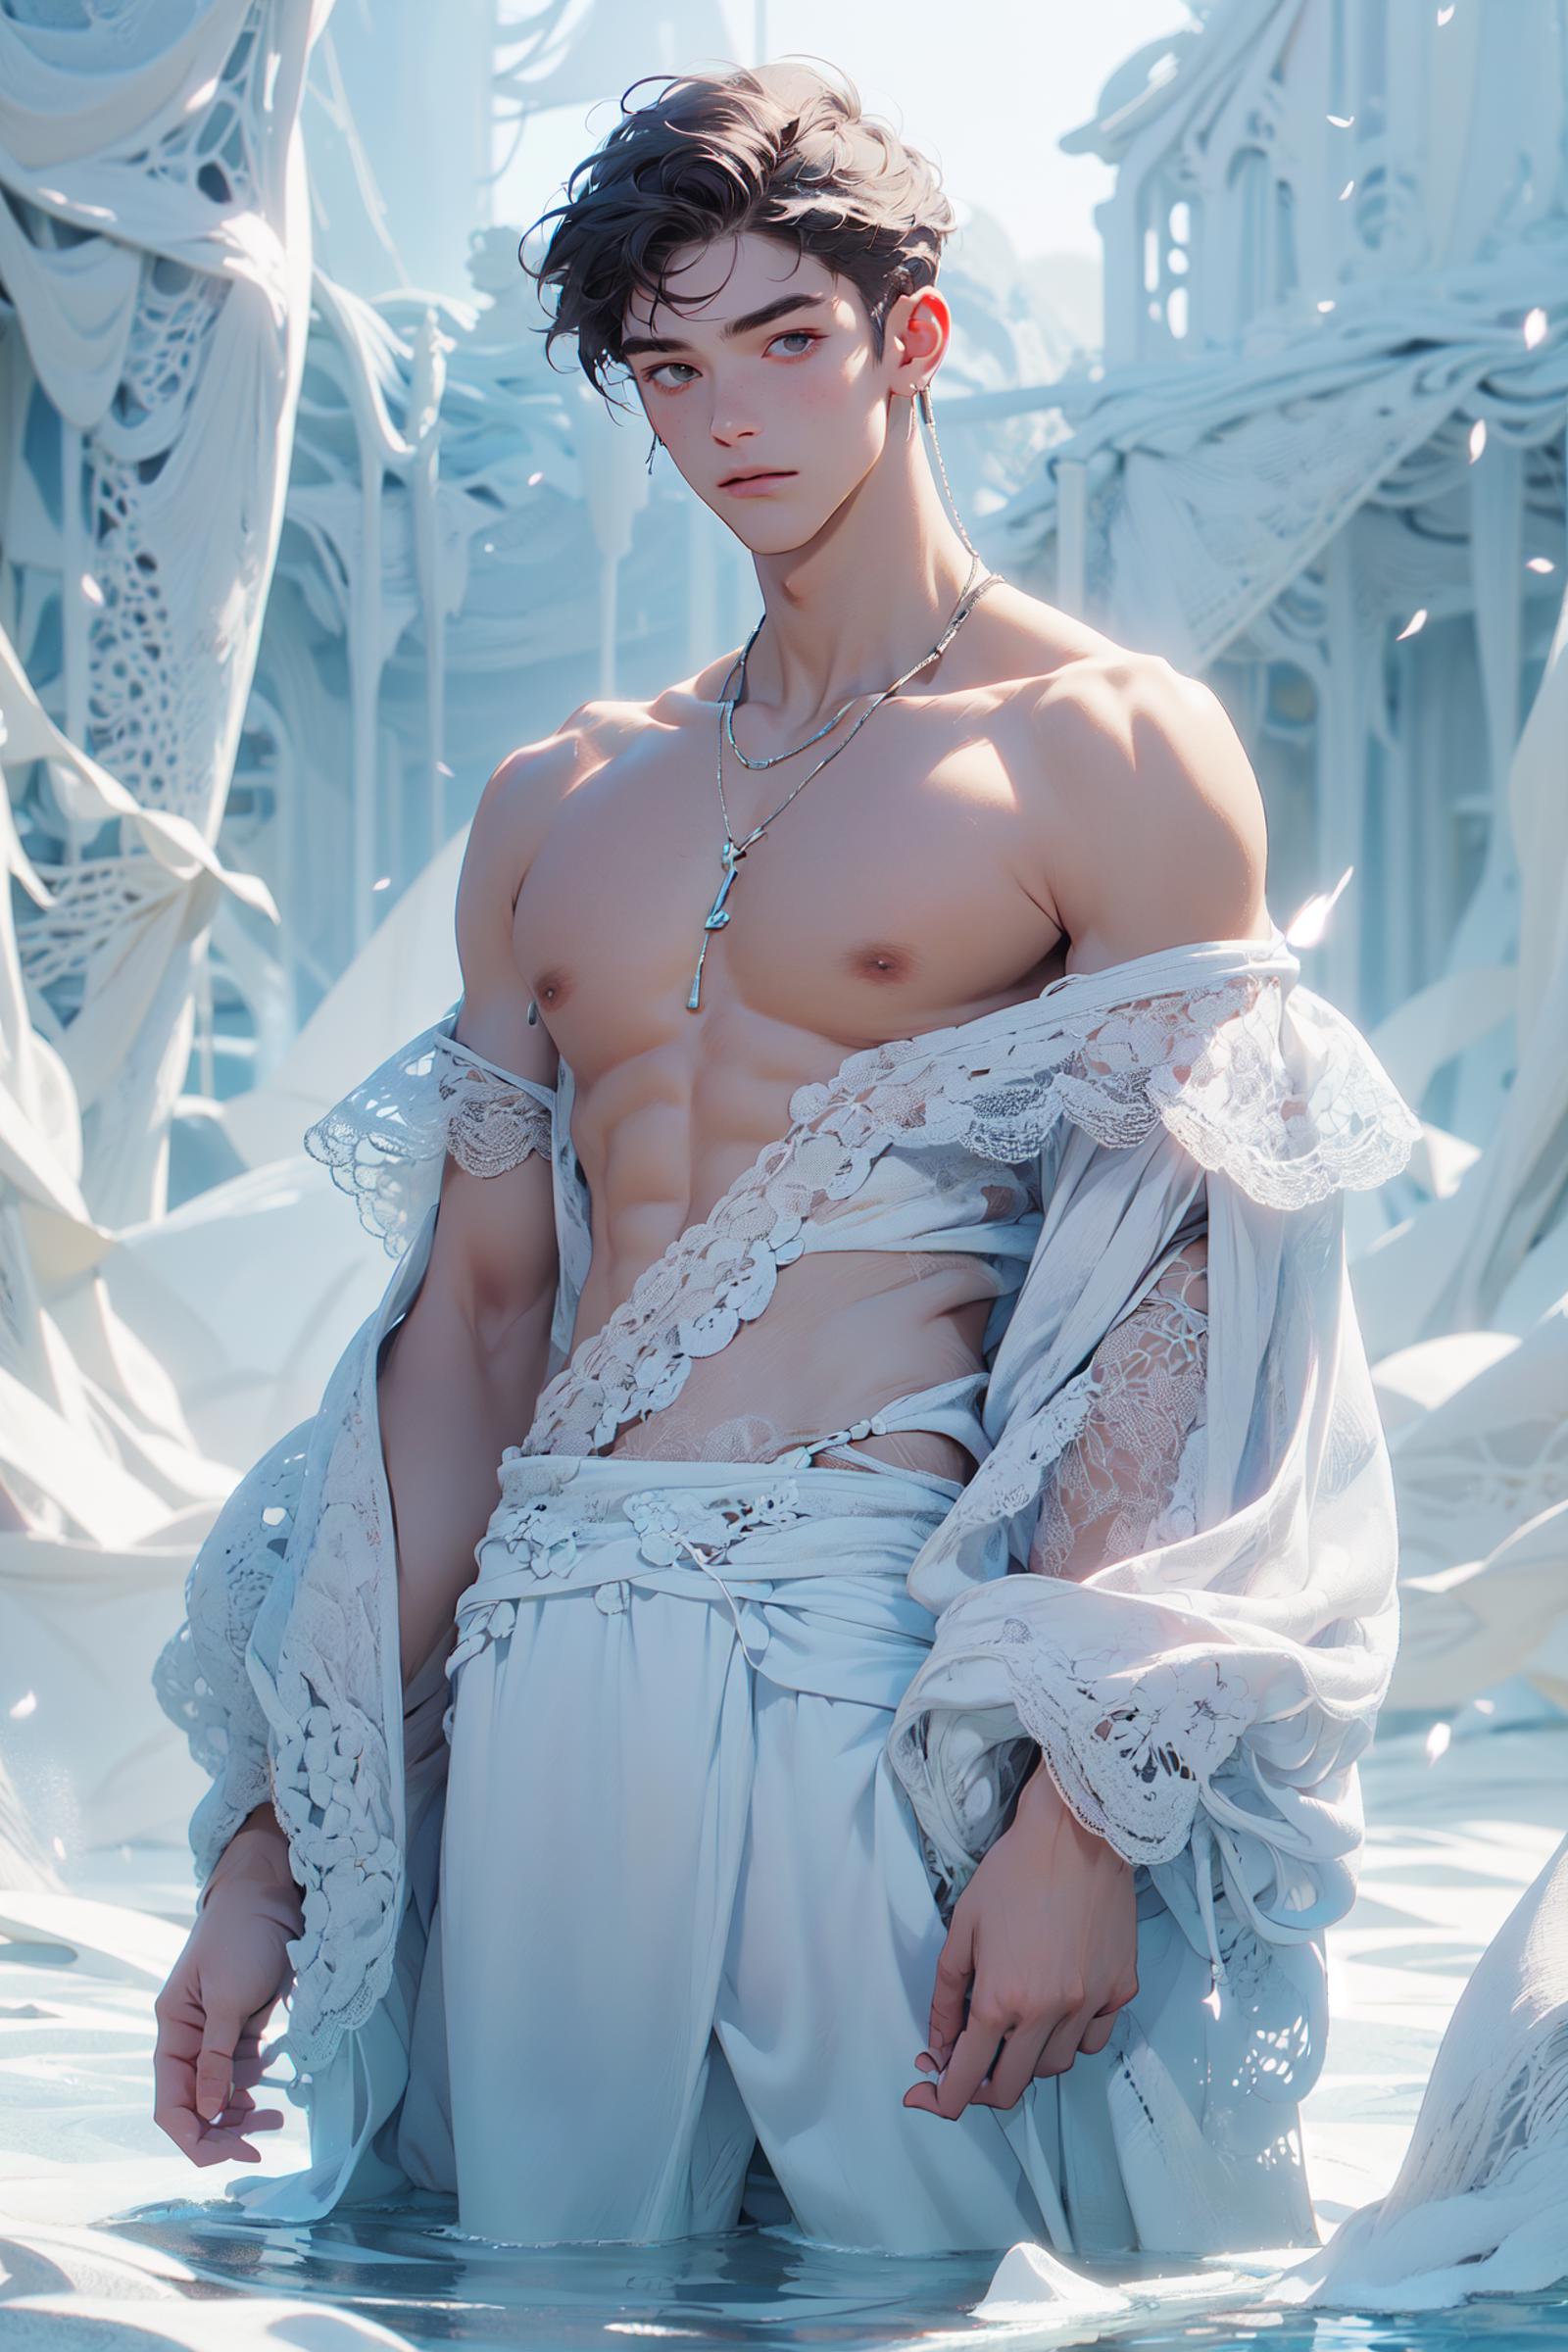 A Sexy Shirtless Man in a White Gown.